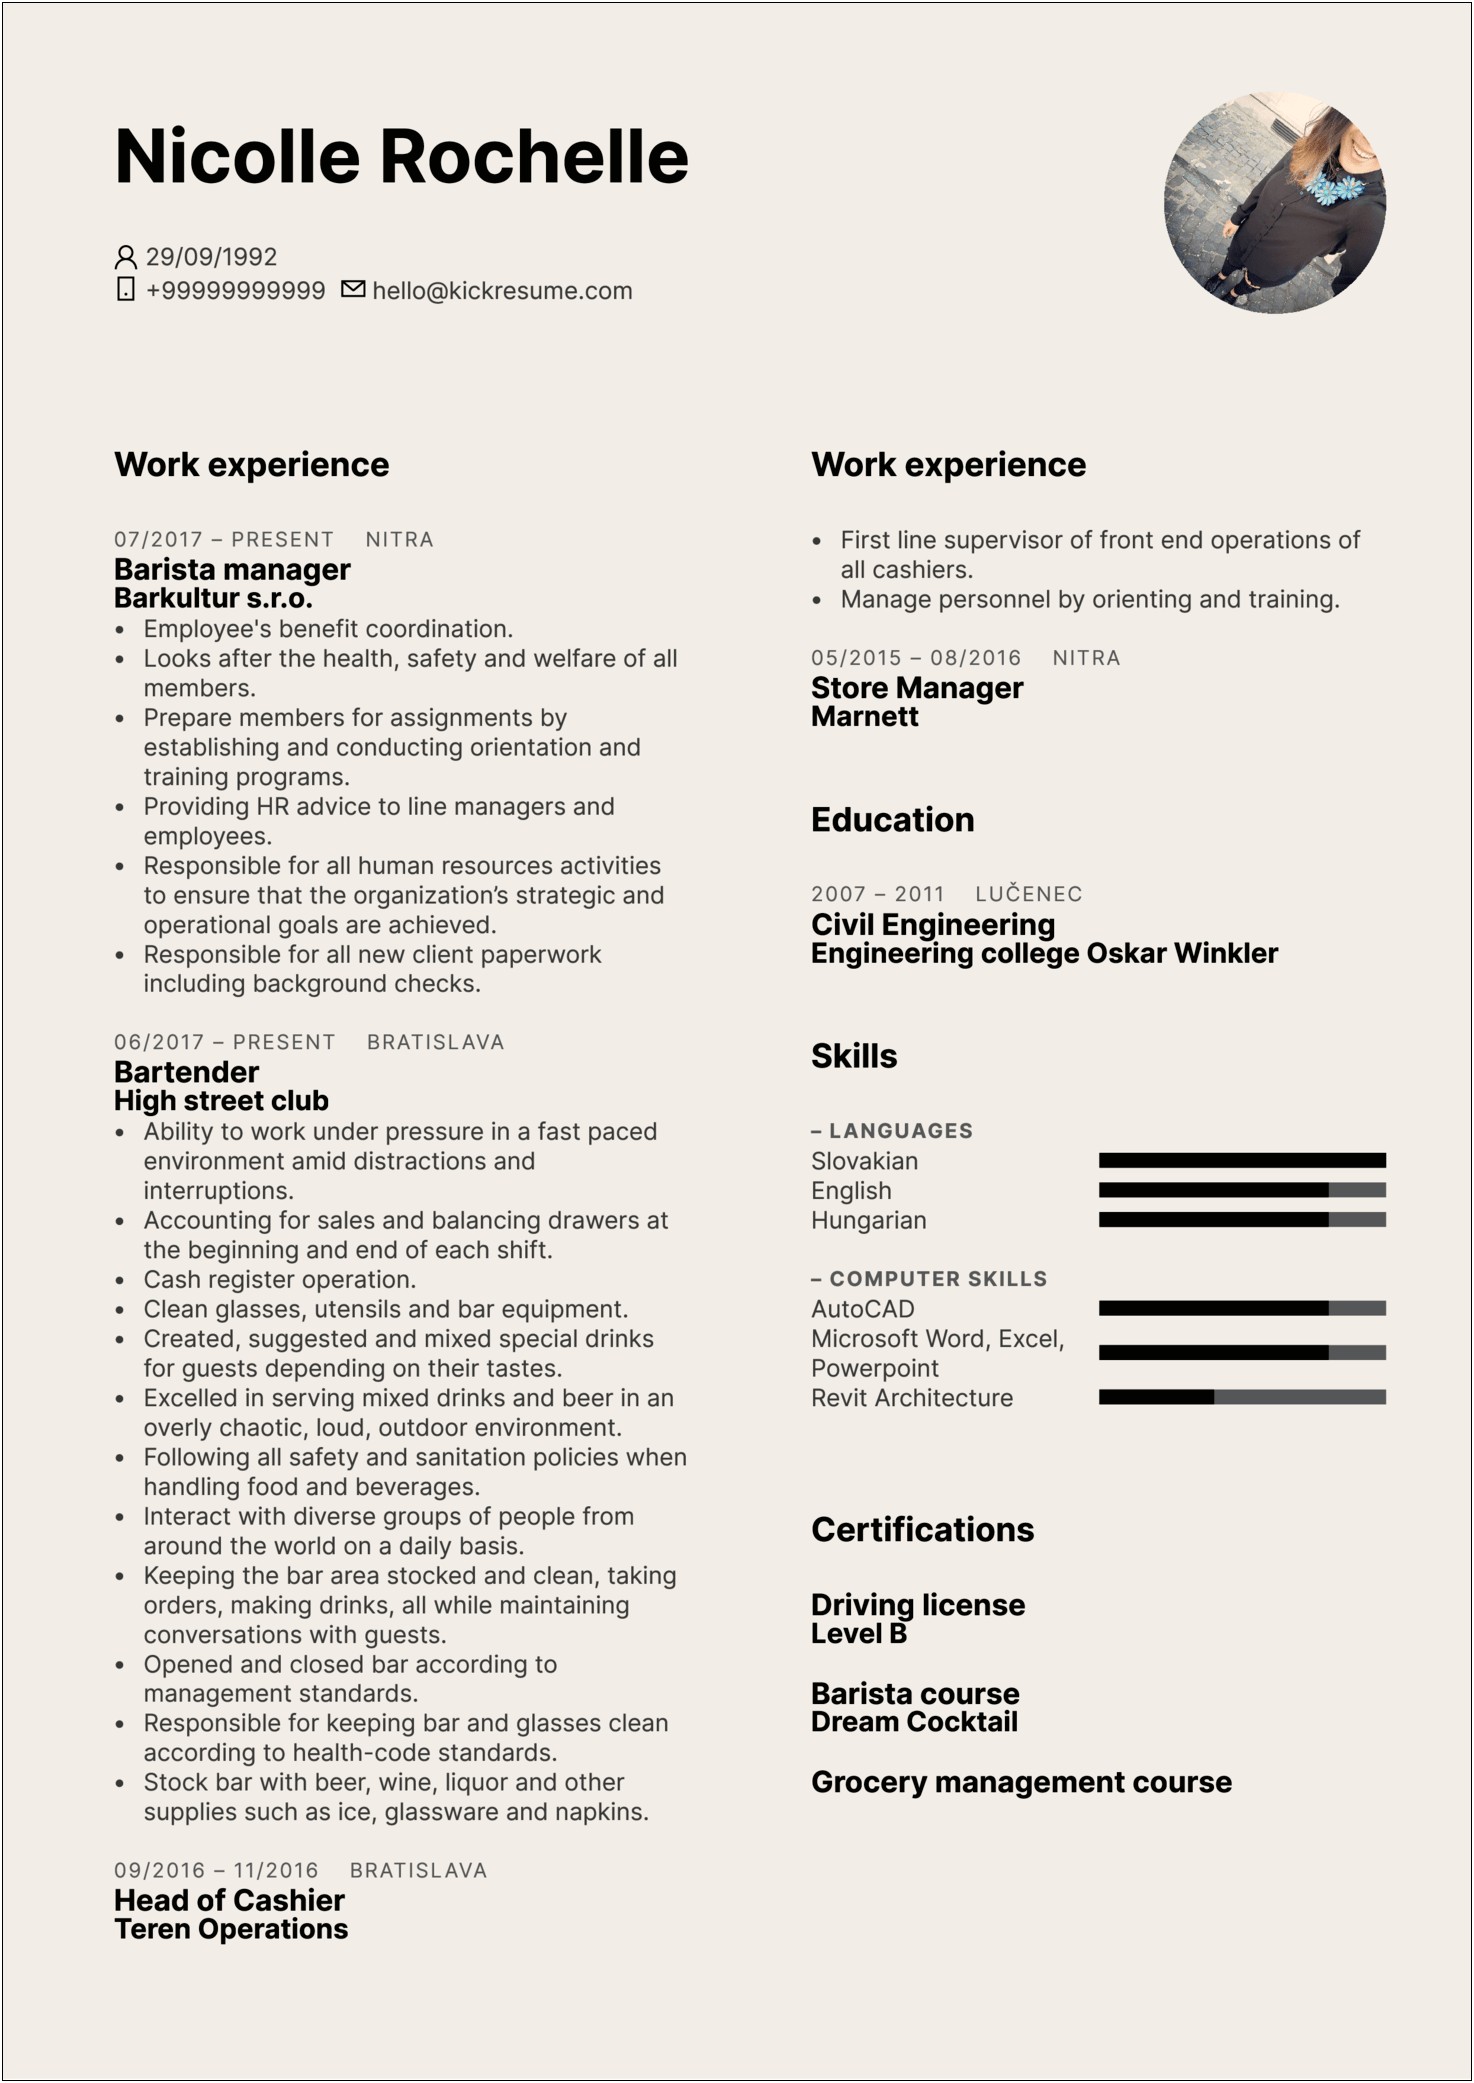 Resume Example For Cashier At Grocery Store